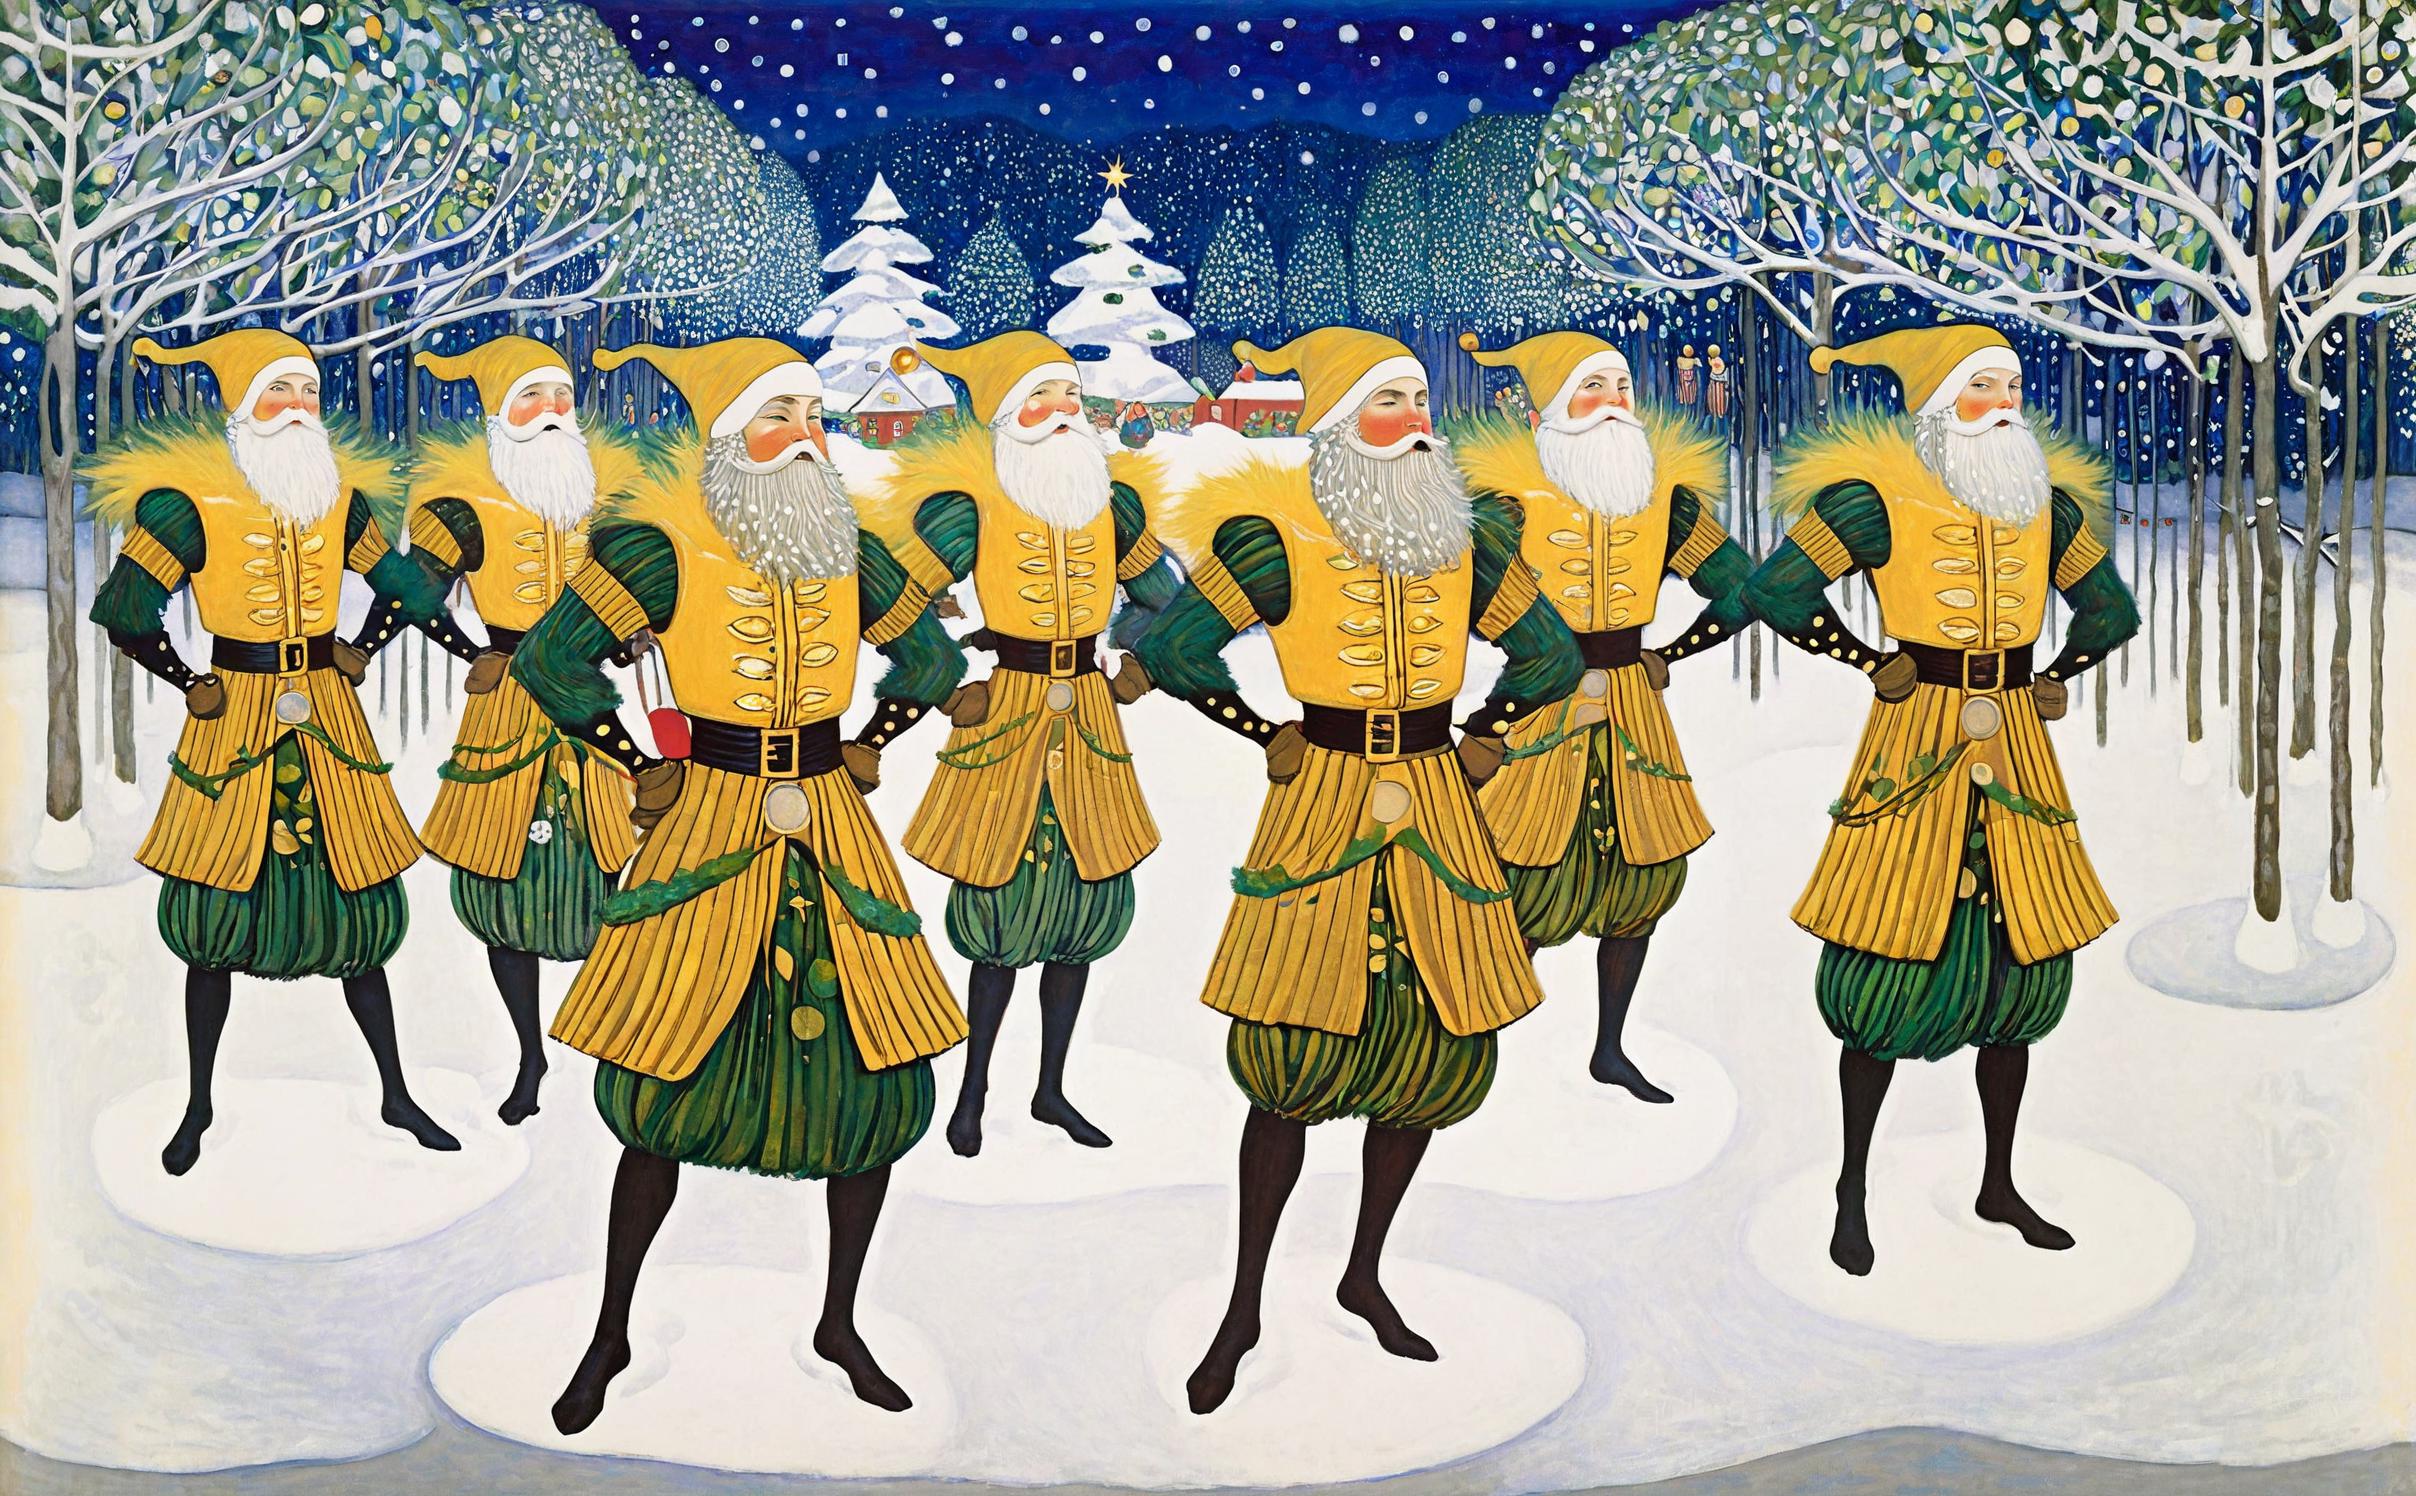 A group of men dressed as Santa Claus dancing in the snow.